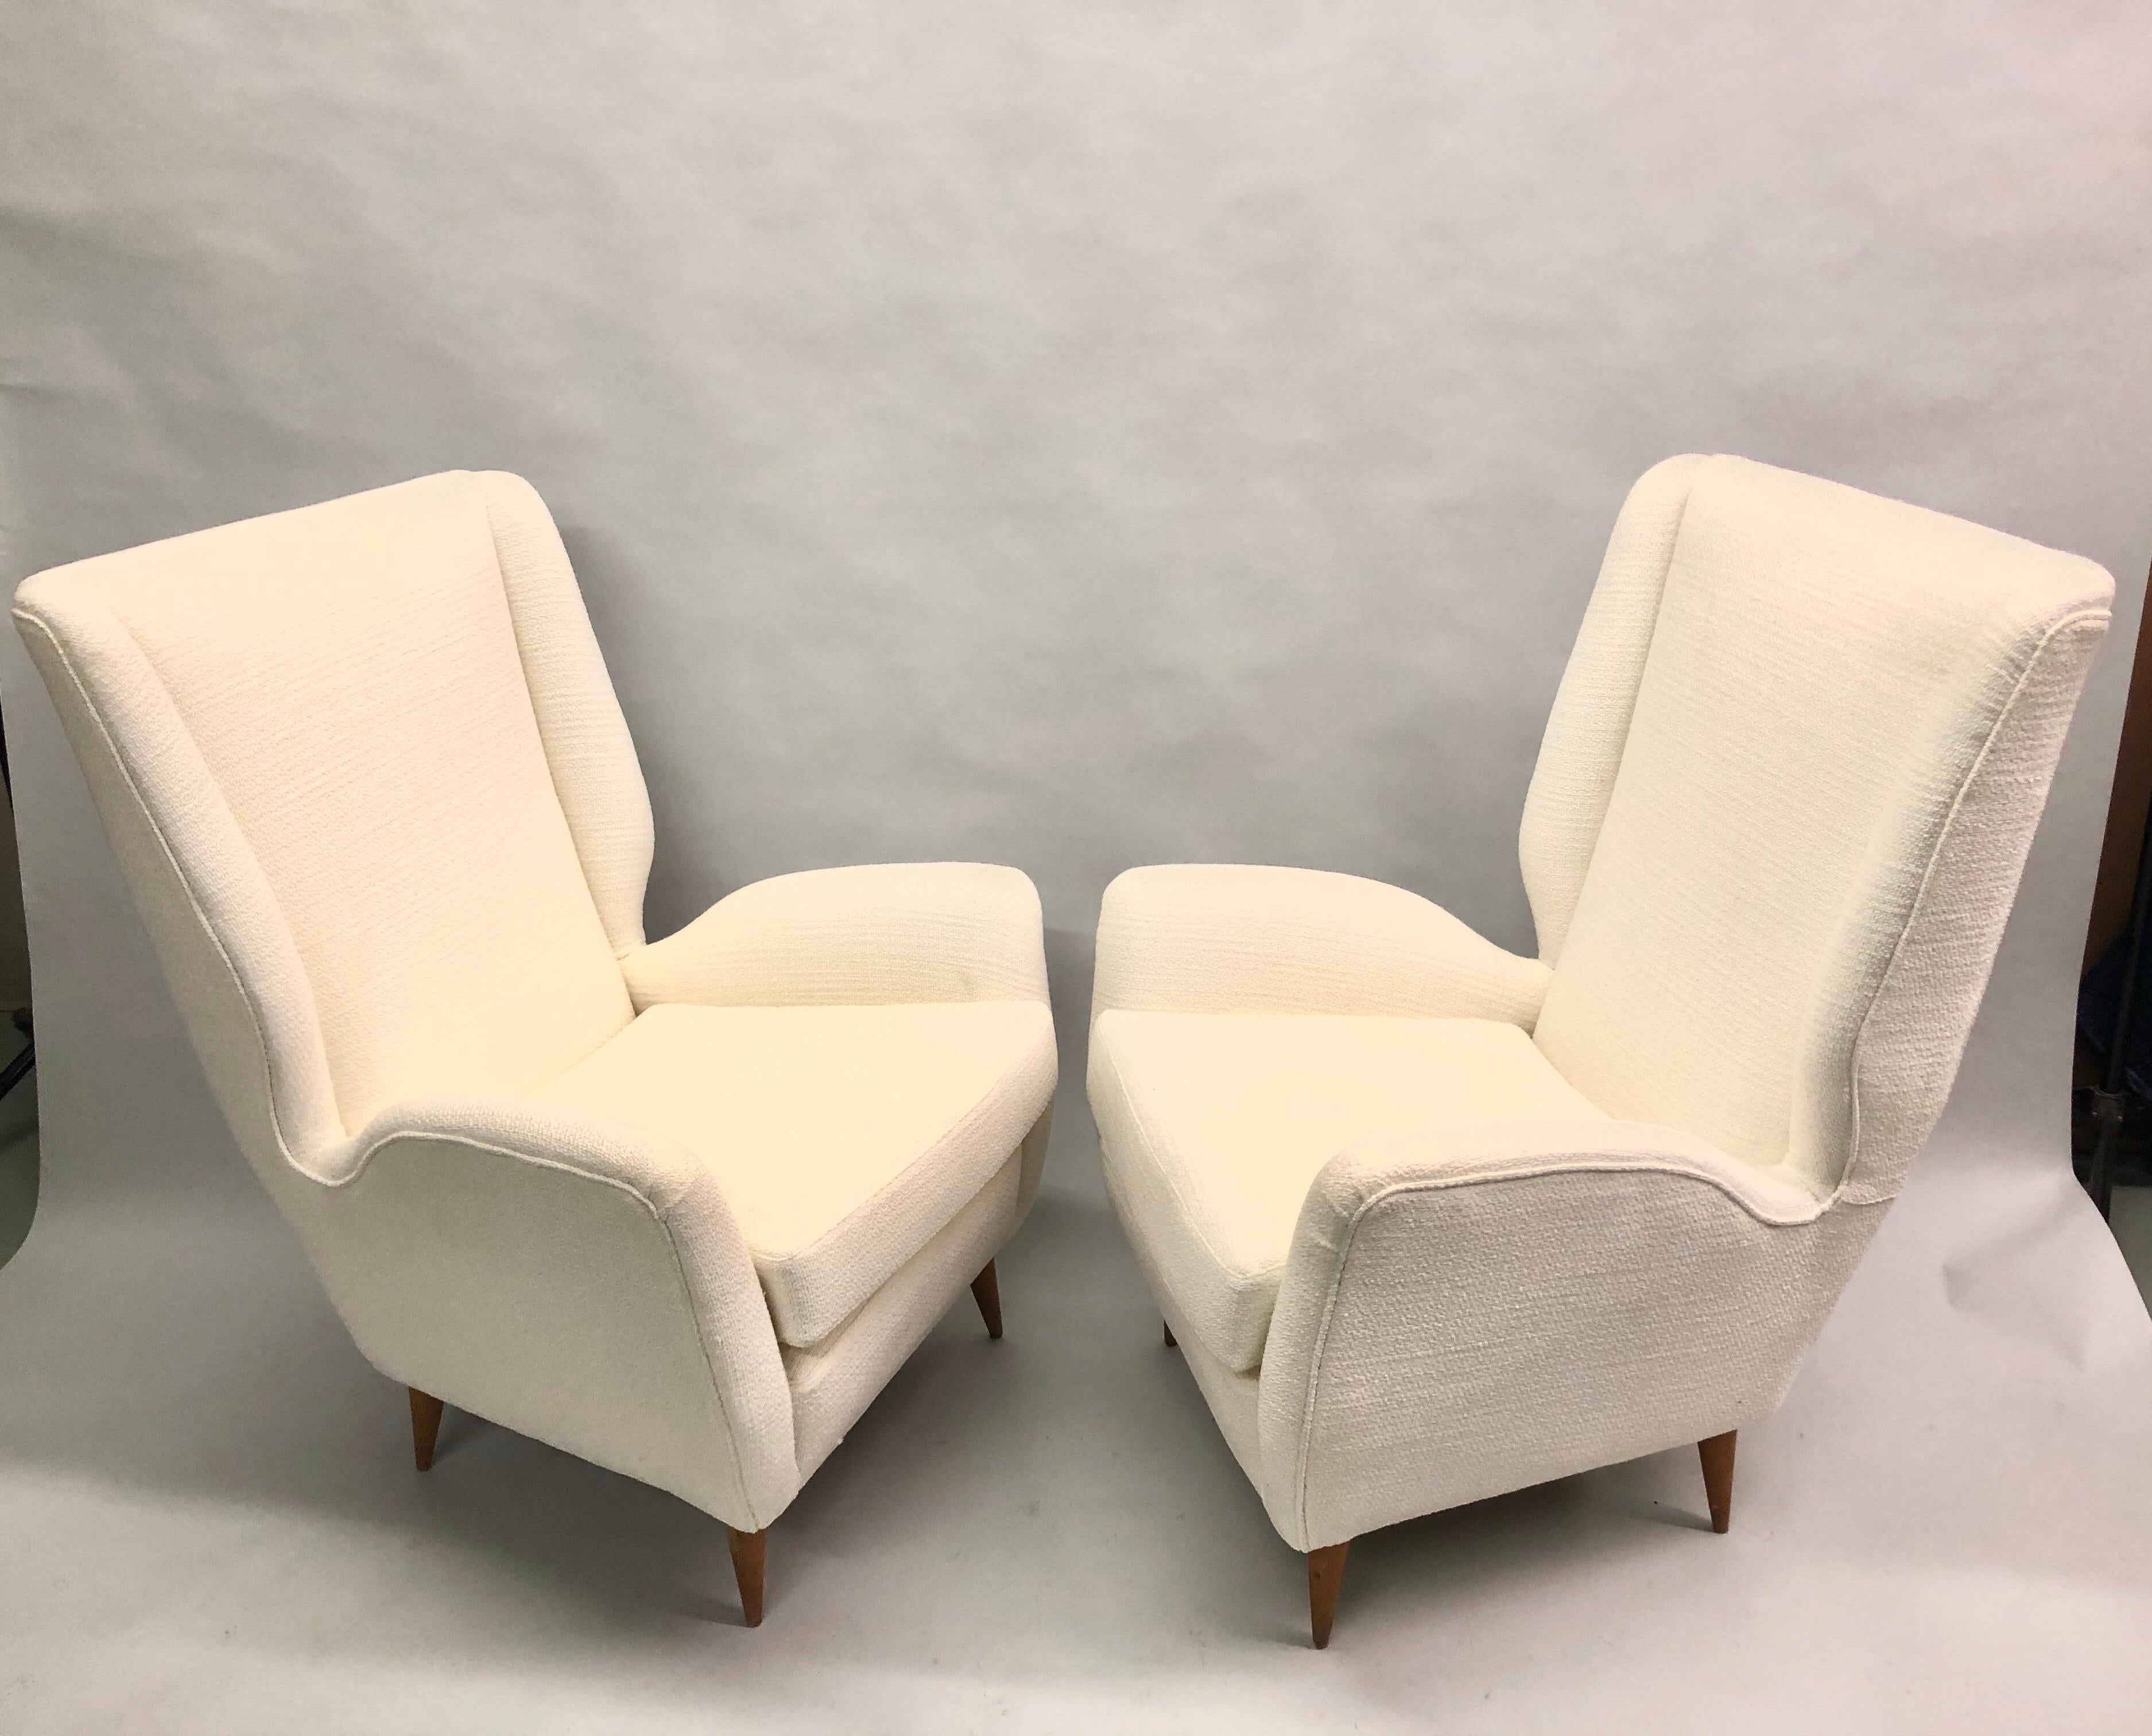 20th Century Pair of Italian Wingback Lounge Chairs / Armchairs by Gio Ponti, Model 512